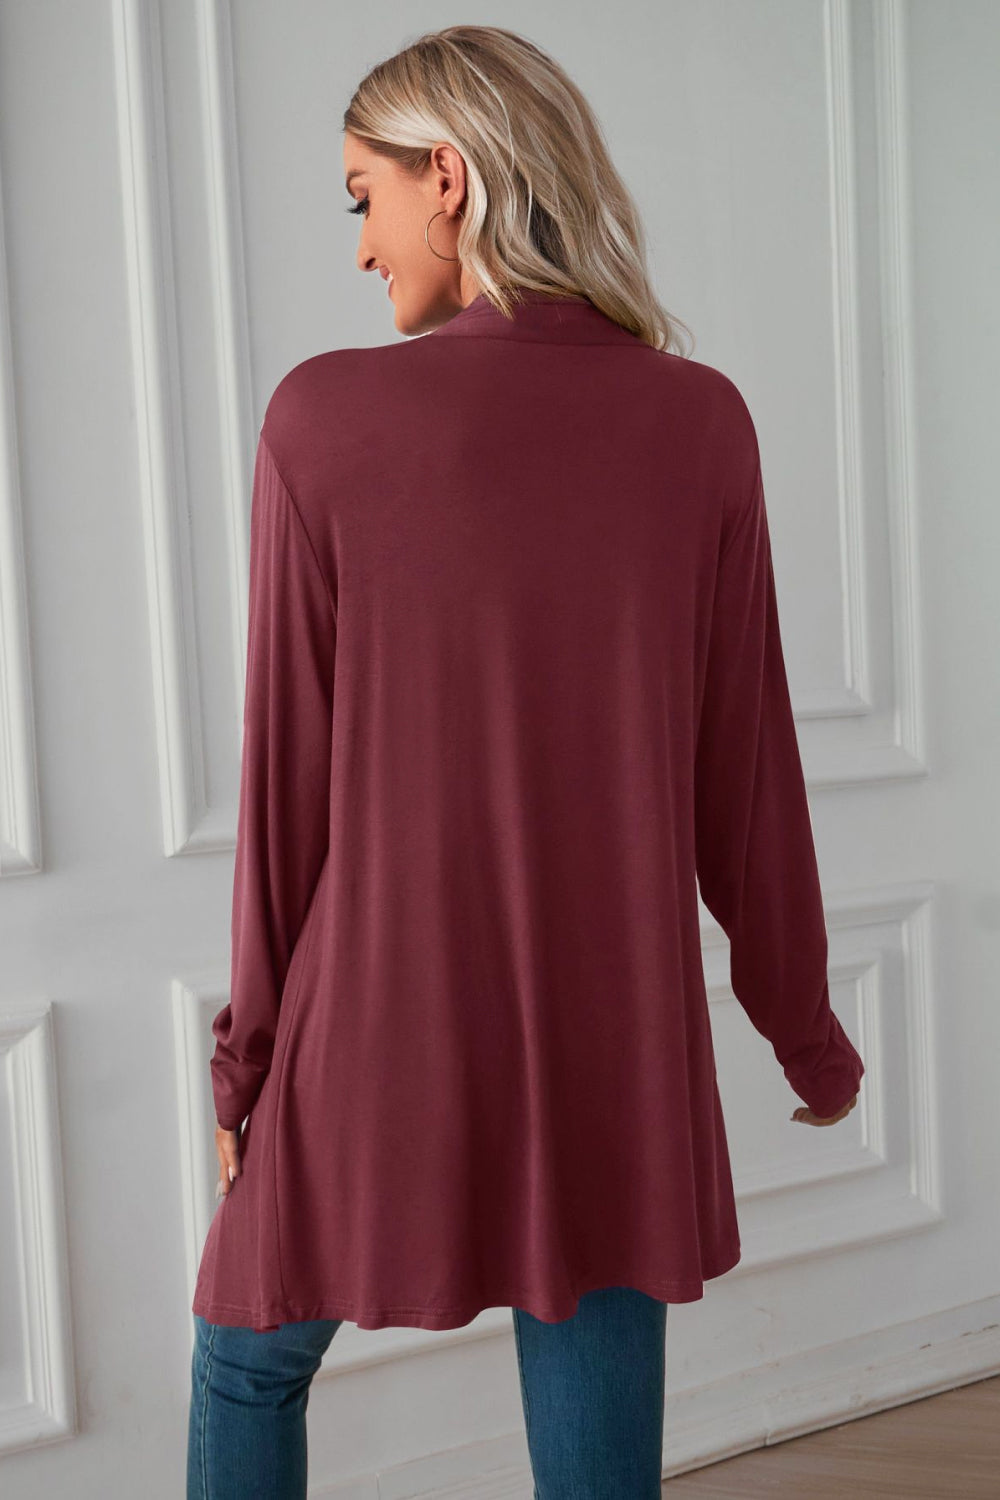 Open Front Long Sleeve Cardigan - Women’s Clothing & Accessories - Shirts & Tops - 20 - 2024